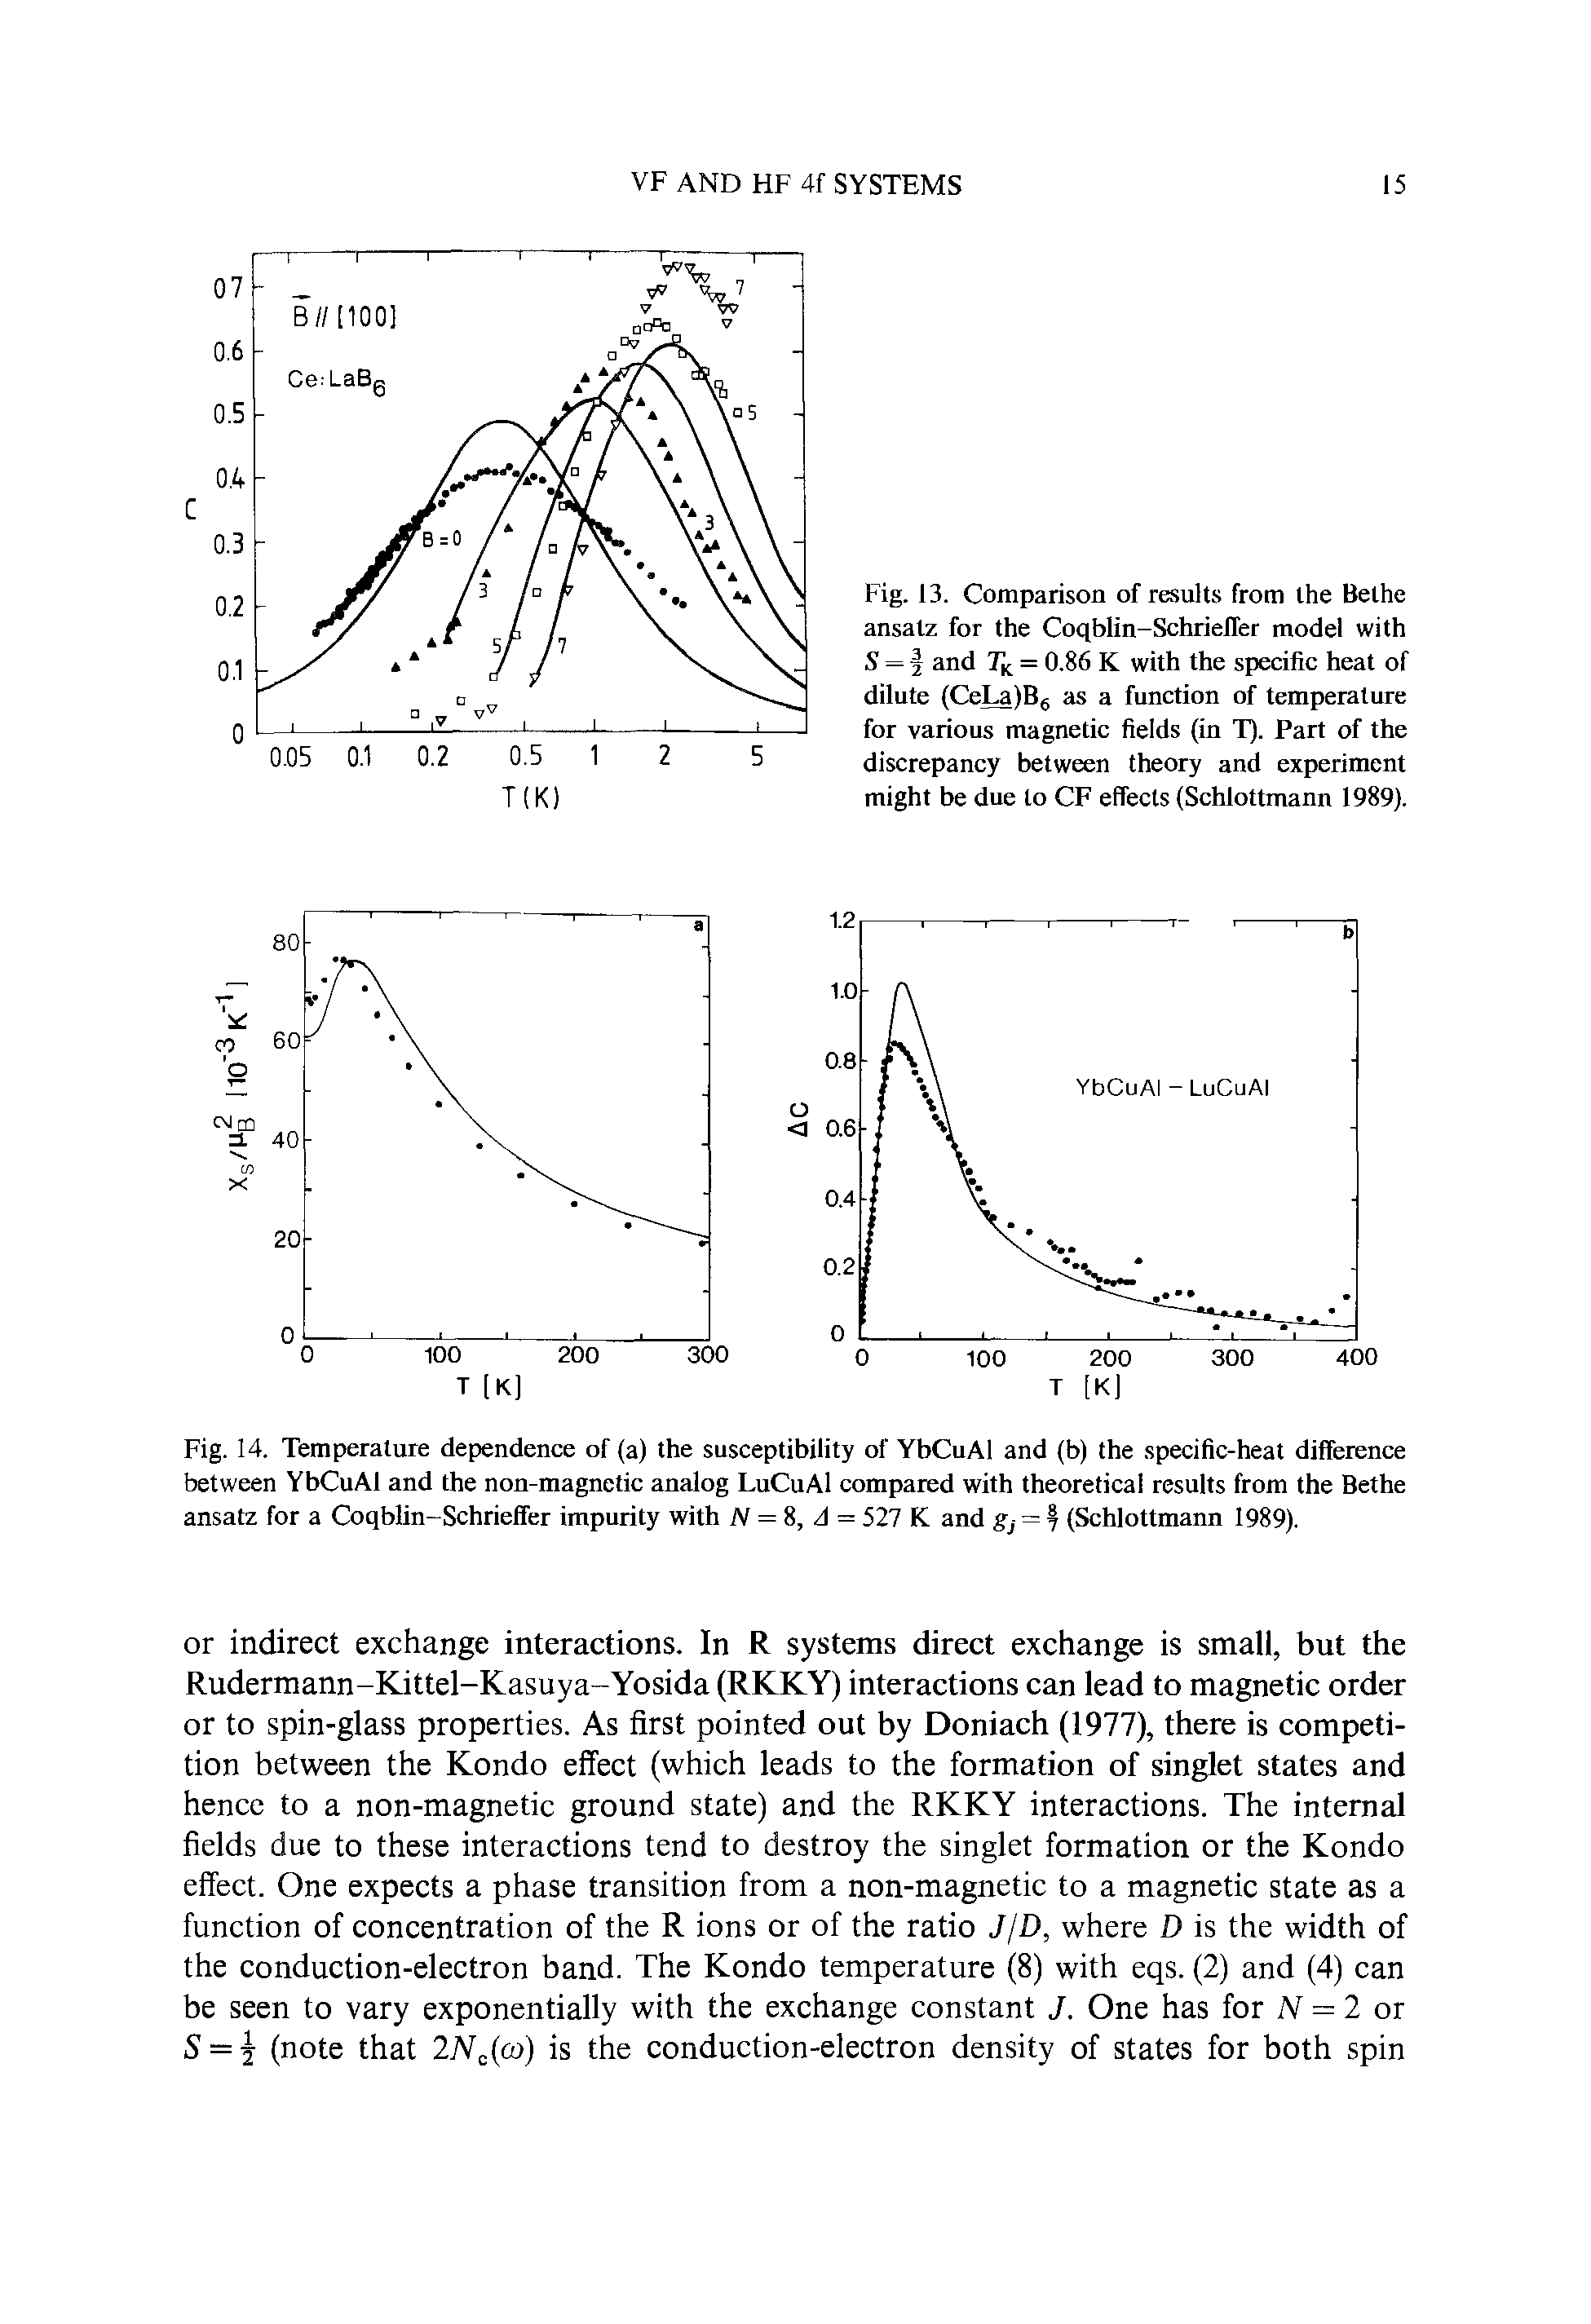 Fig. 14. Temperature dependence of (a) the susceptibility of YbCuAl and (b) the specific-heat difference between YbCuAl and the non-magnetic analog LuCuAl compared with theoretical results from the Bethe ansatz for a Coqblin-Schrieffer impurity with iv = 8, d = 527 K and gj = f (Schlottmann 1989).